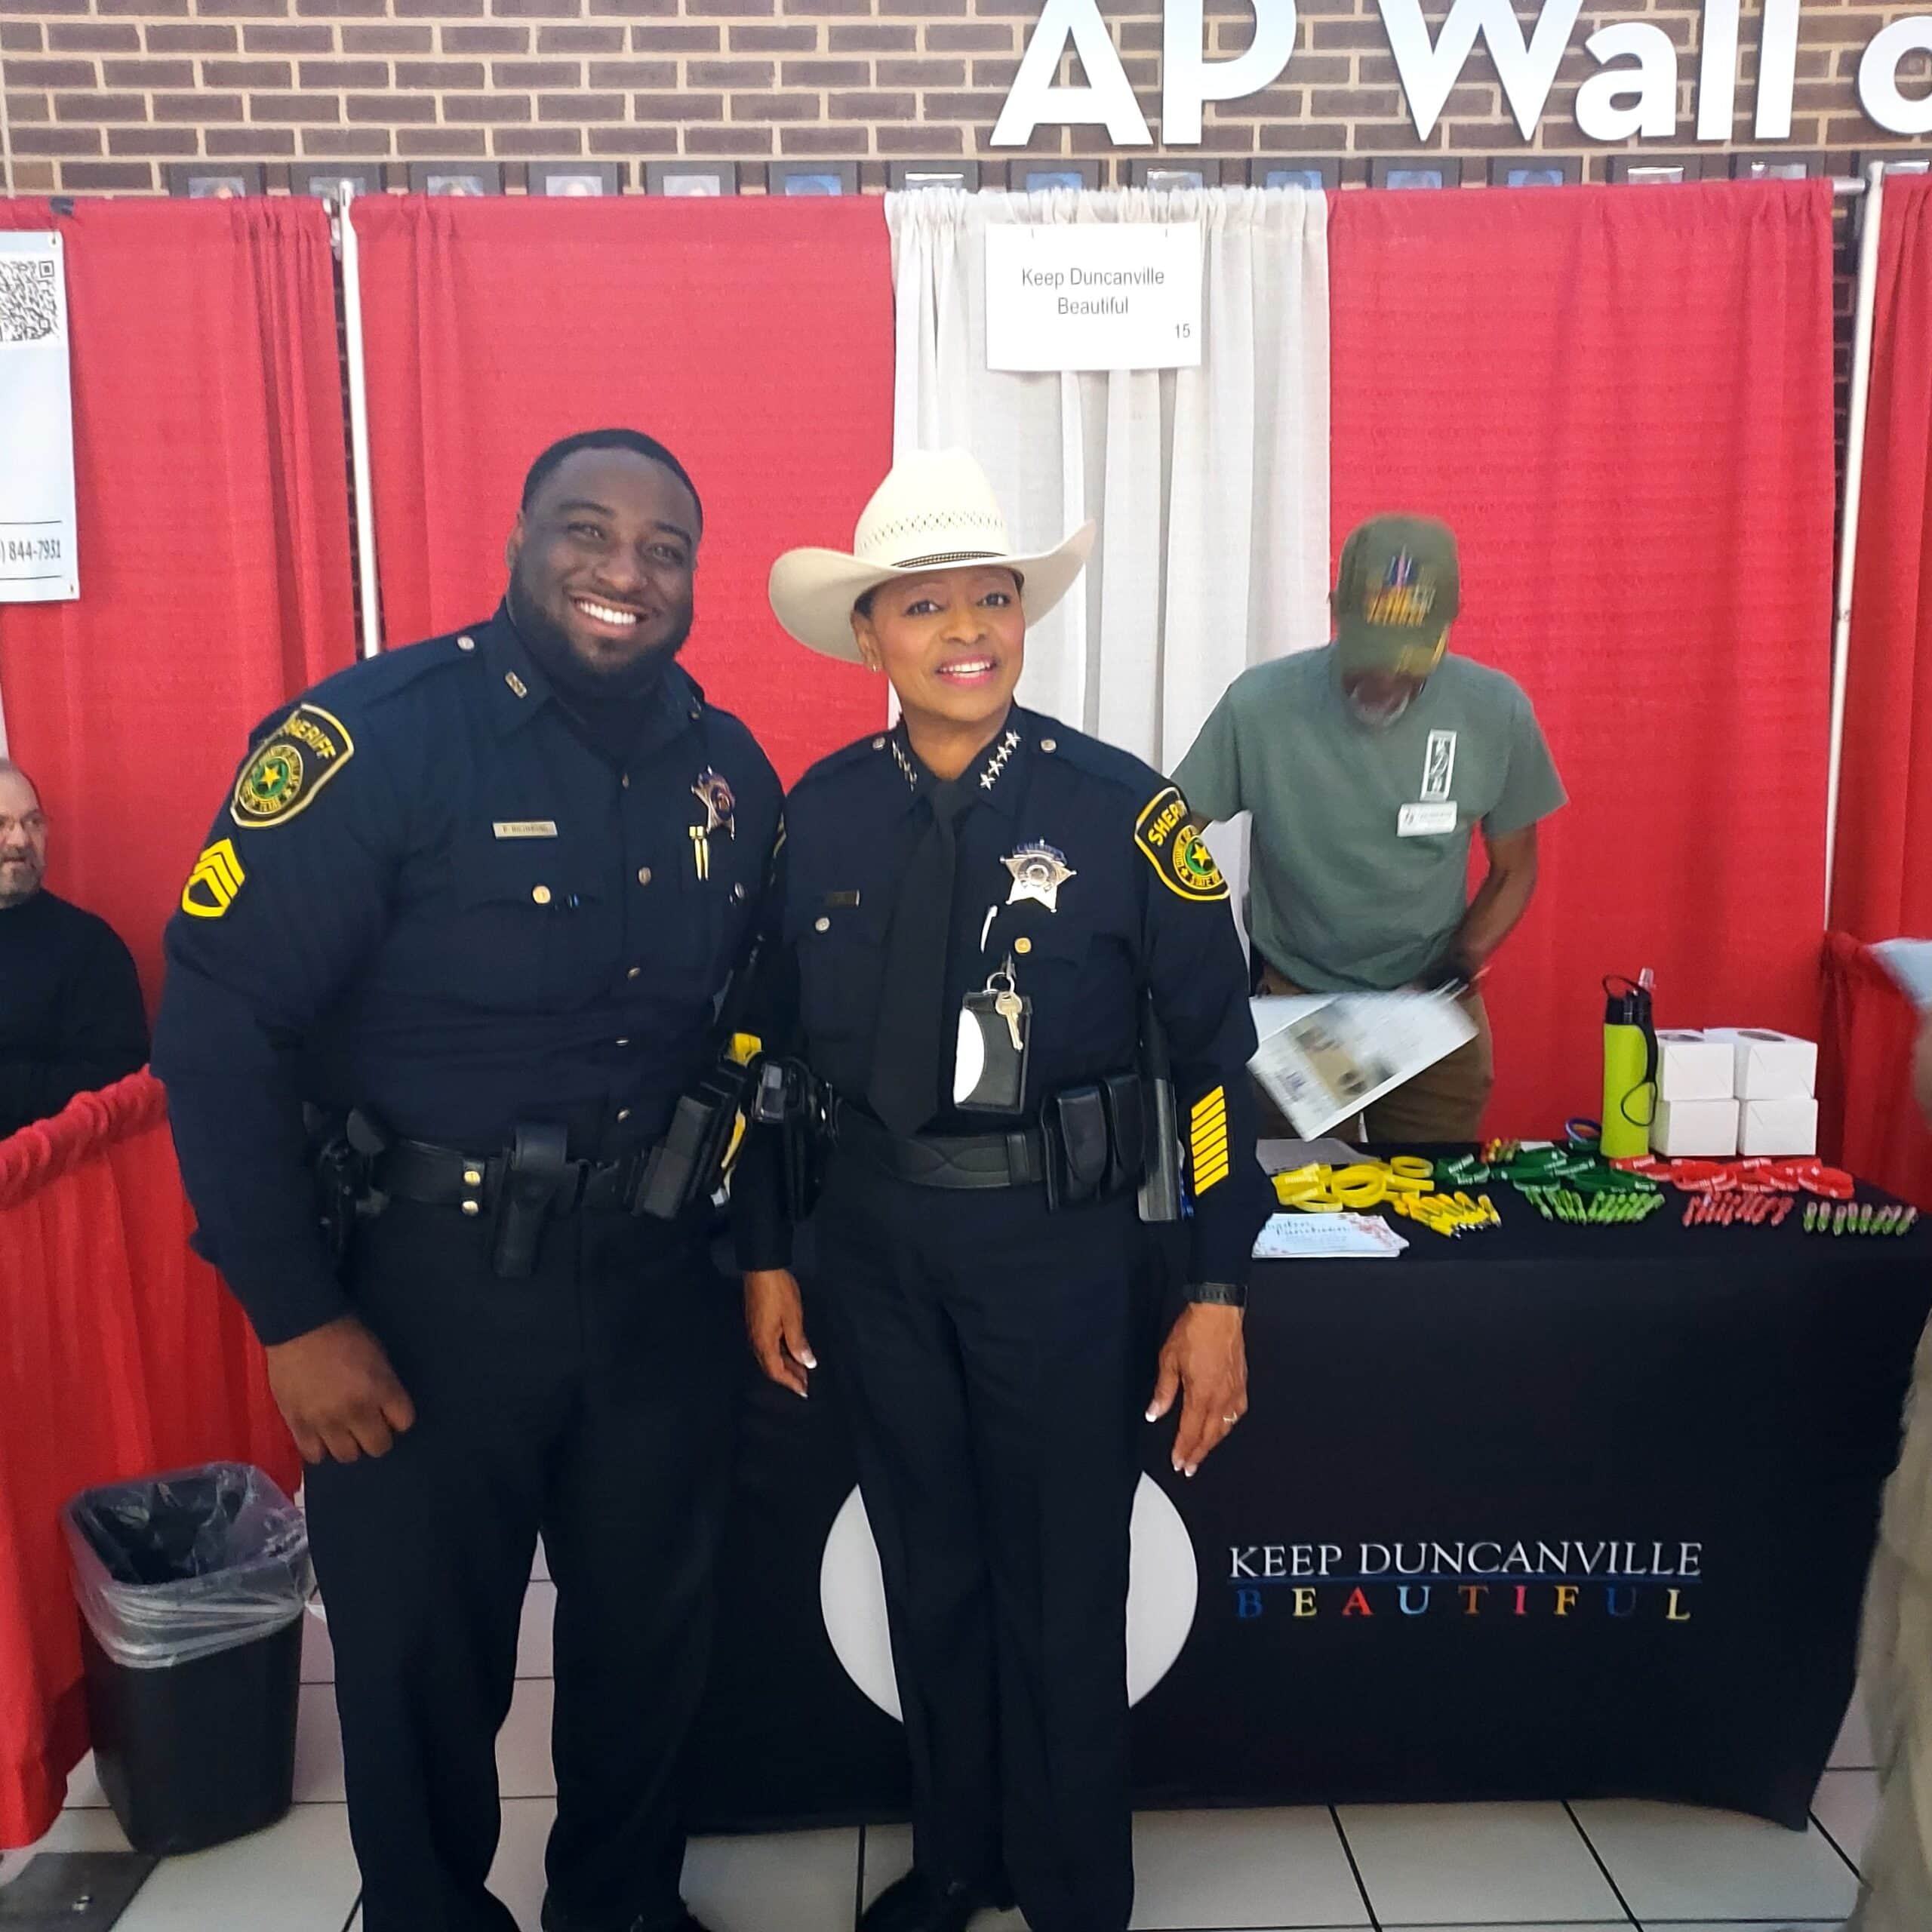 Sheriff and deputy at Flavor event